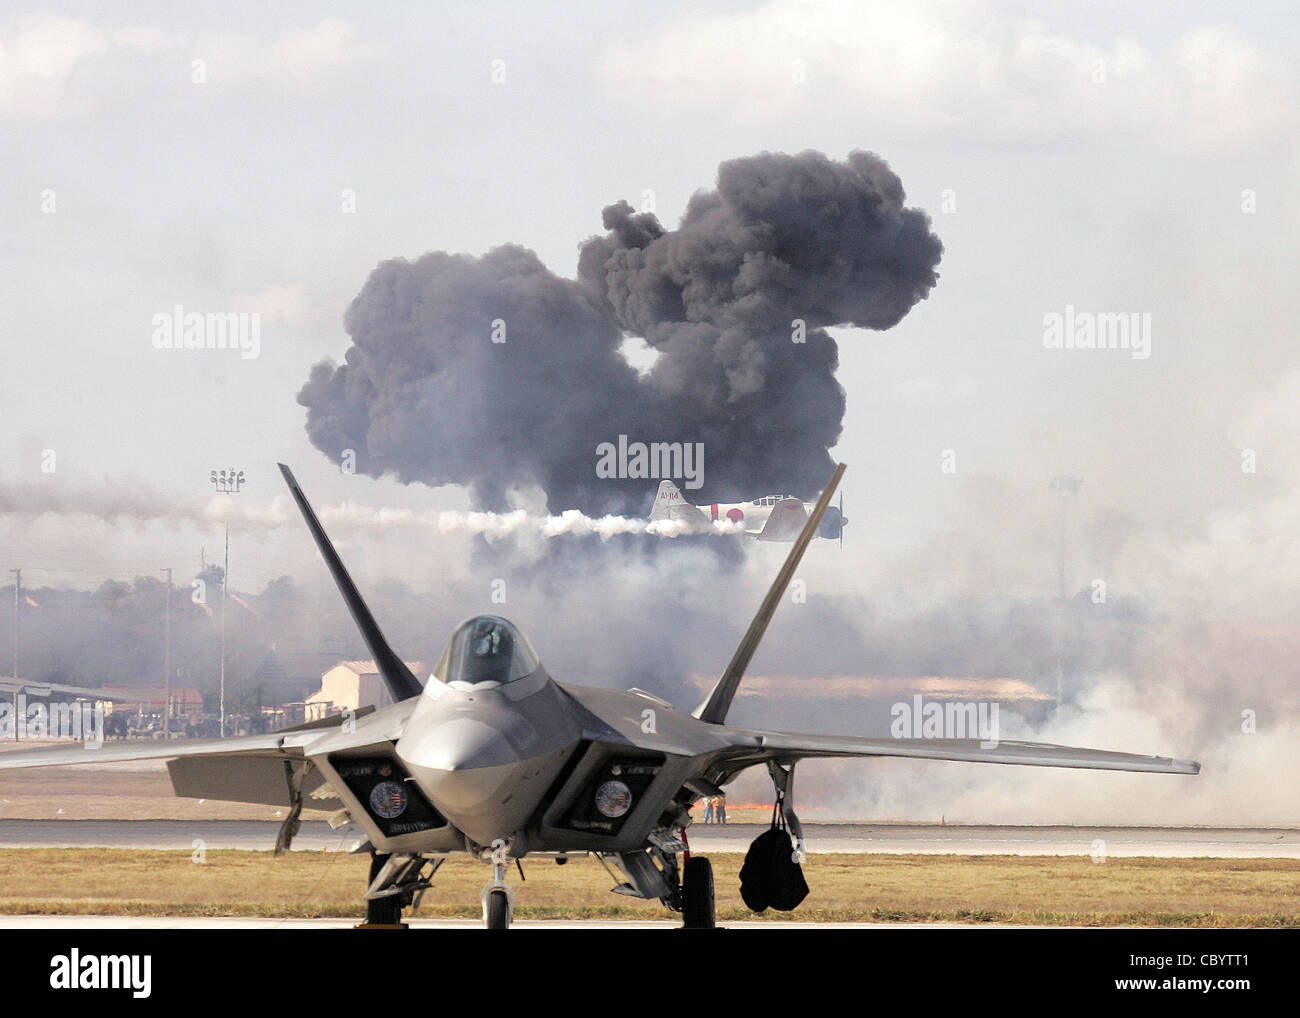 The Pearl Harbor reenactment of 'Tora! Tora! Tora!' fills the sky with smoke as a Japanese Zero streaks by behind an F-22 Raptor during AirFest 2008 at Lackland Air Force Base, Texas. Stock Photo